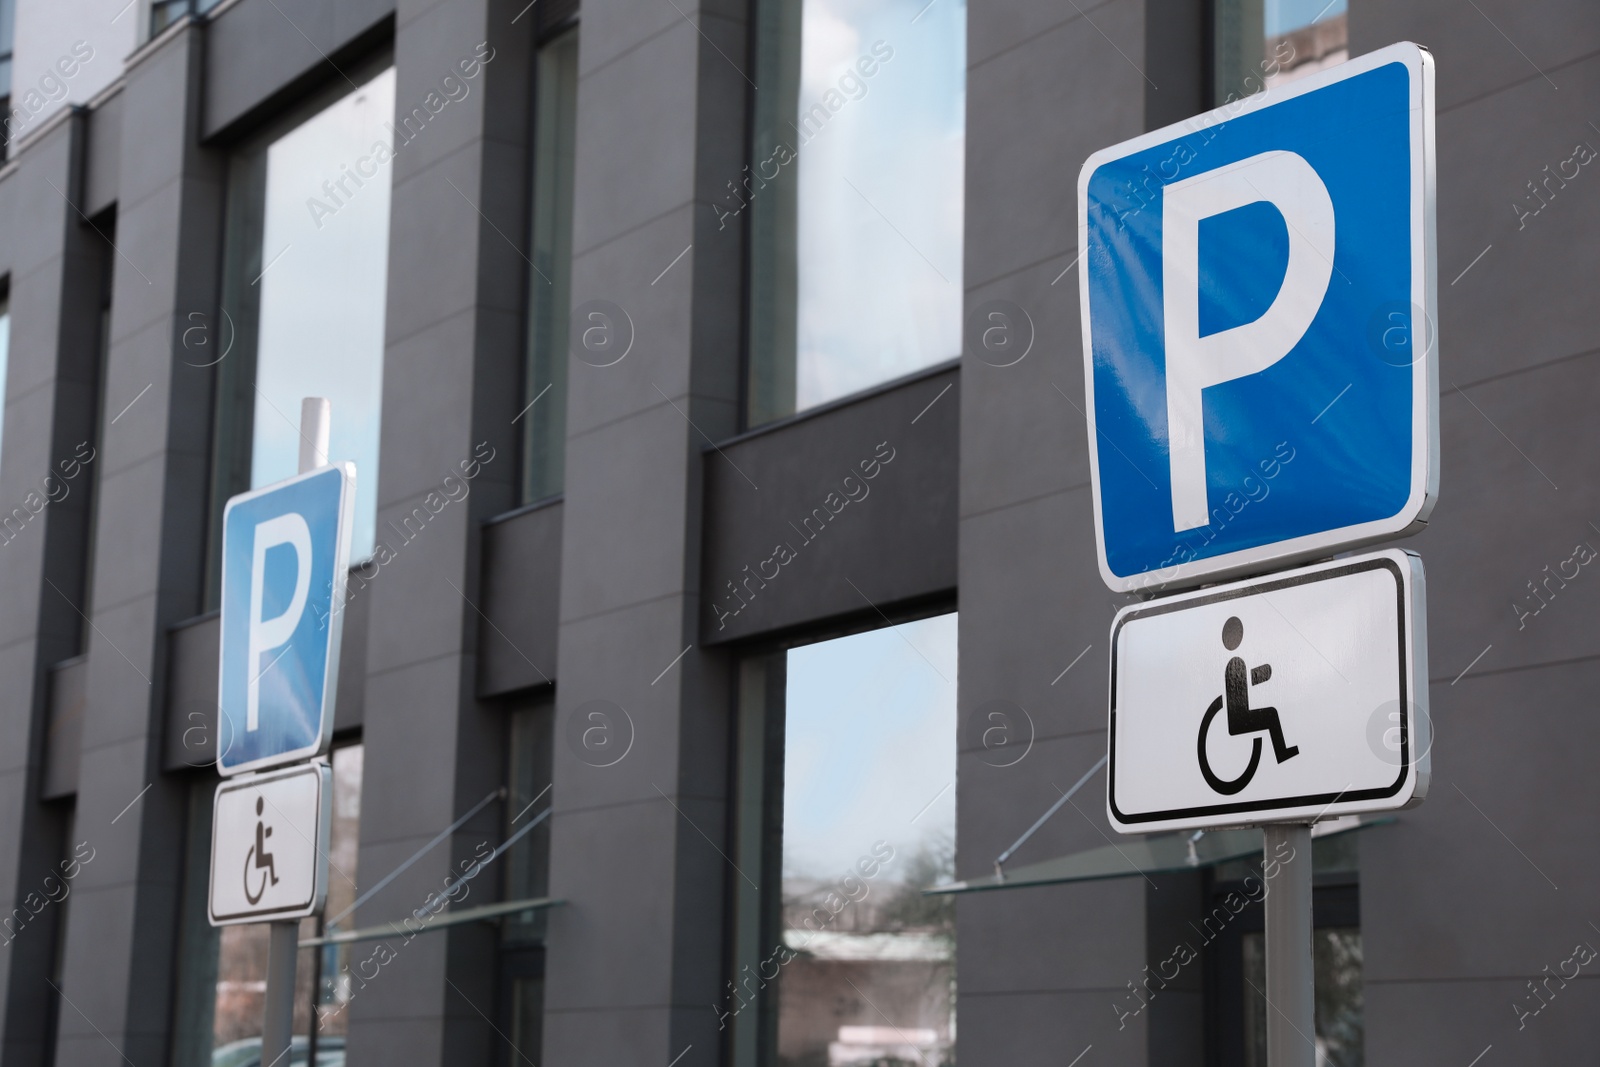 Photo of Traffic sign Parking for people with disability near modern building